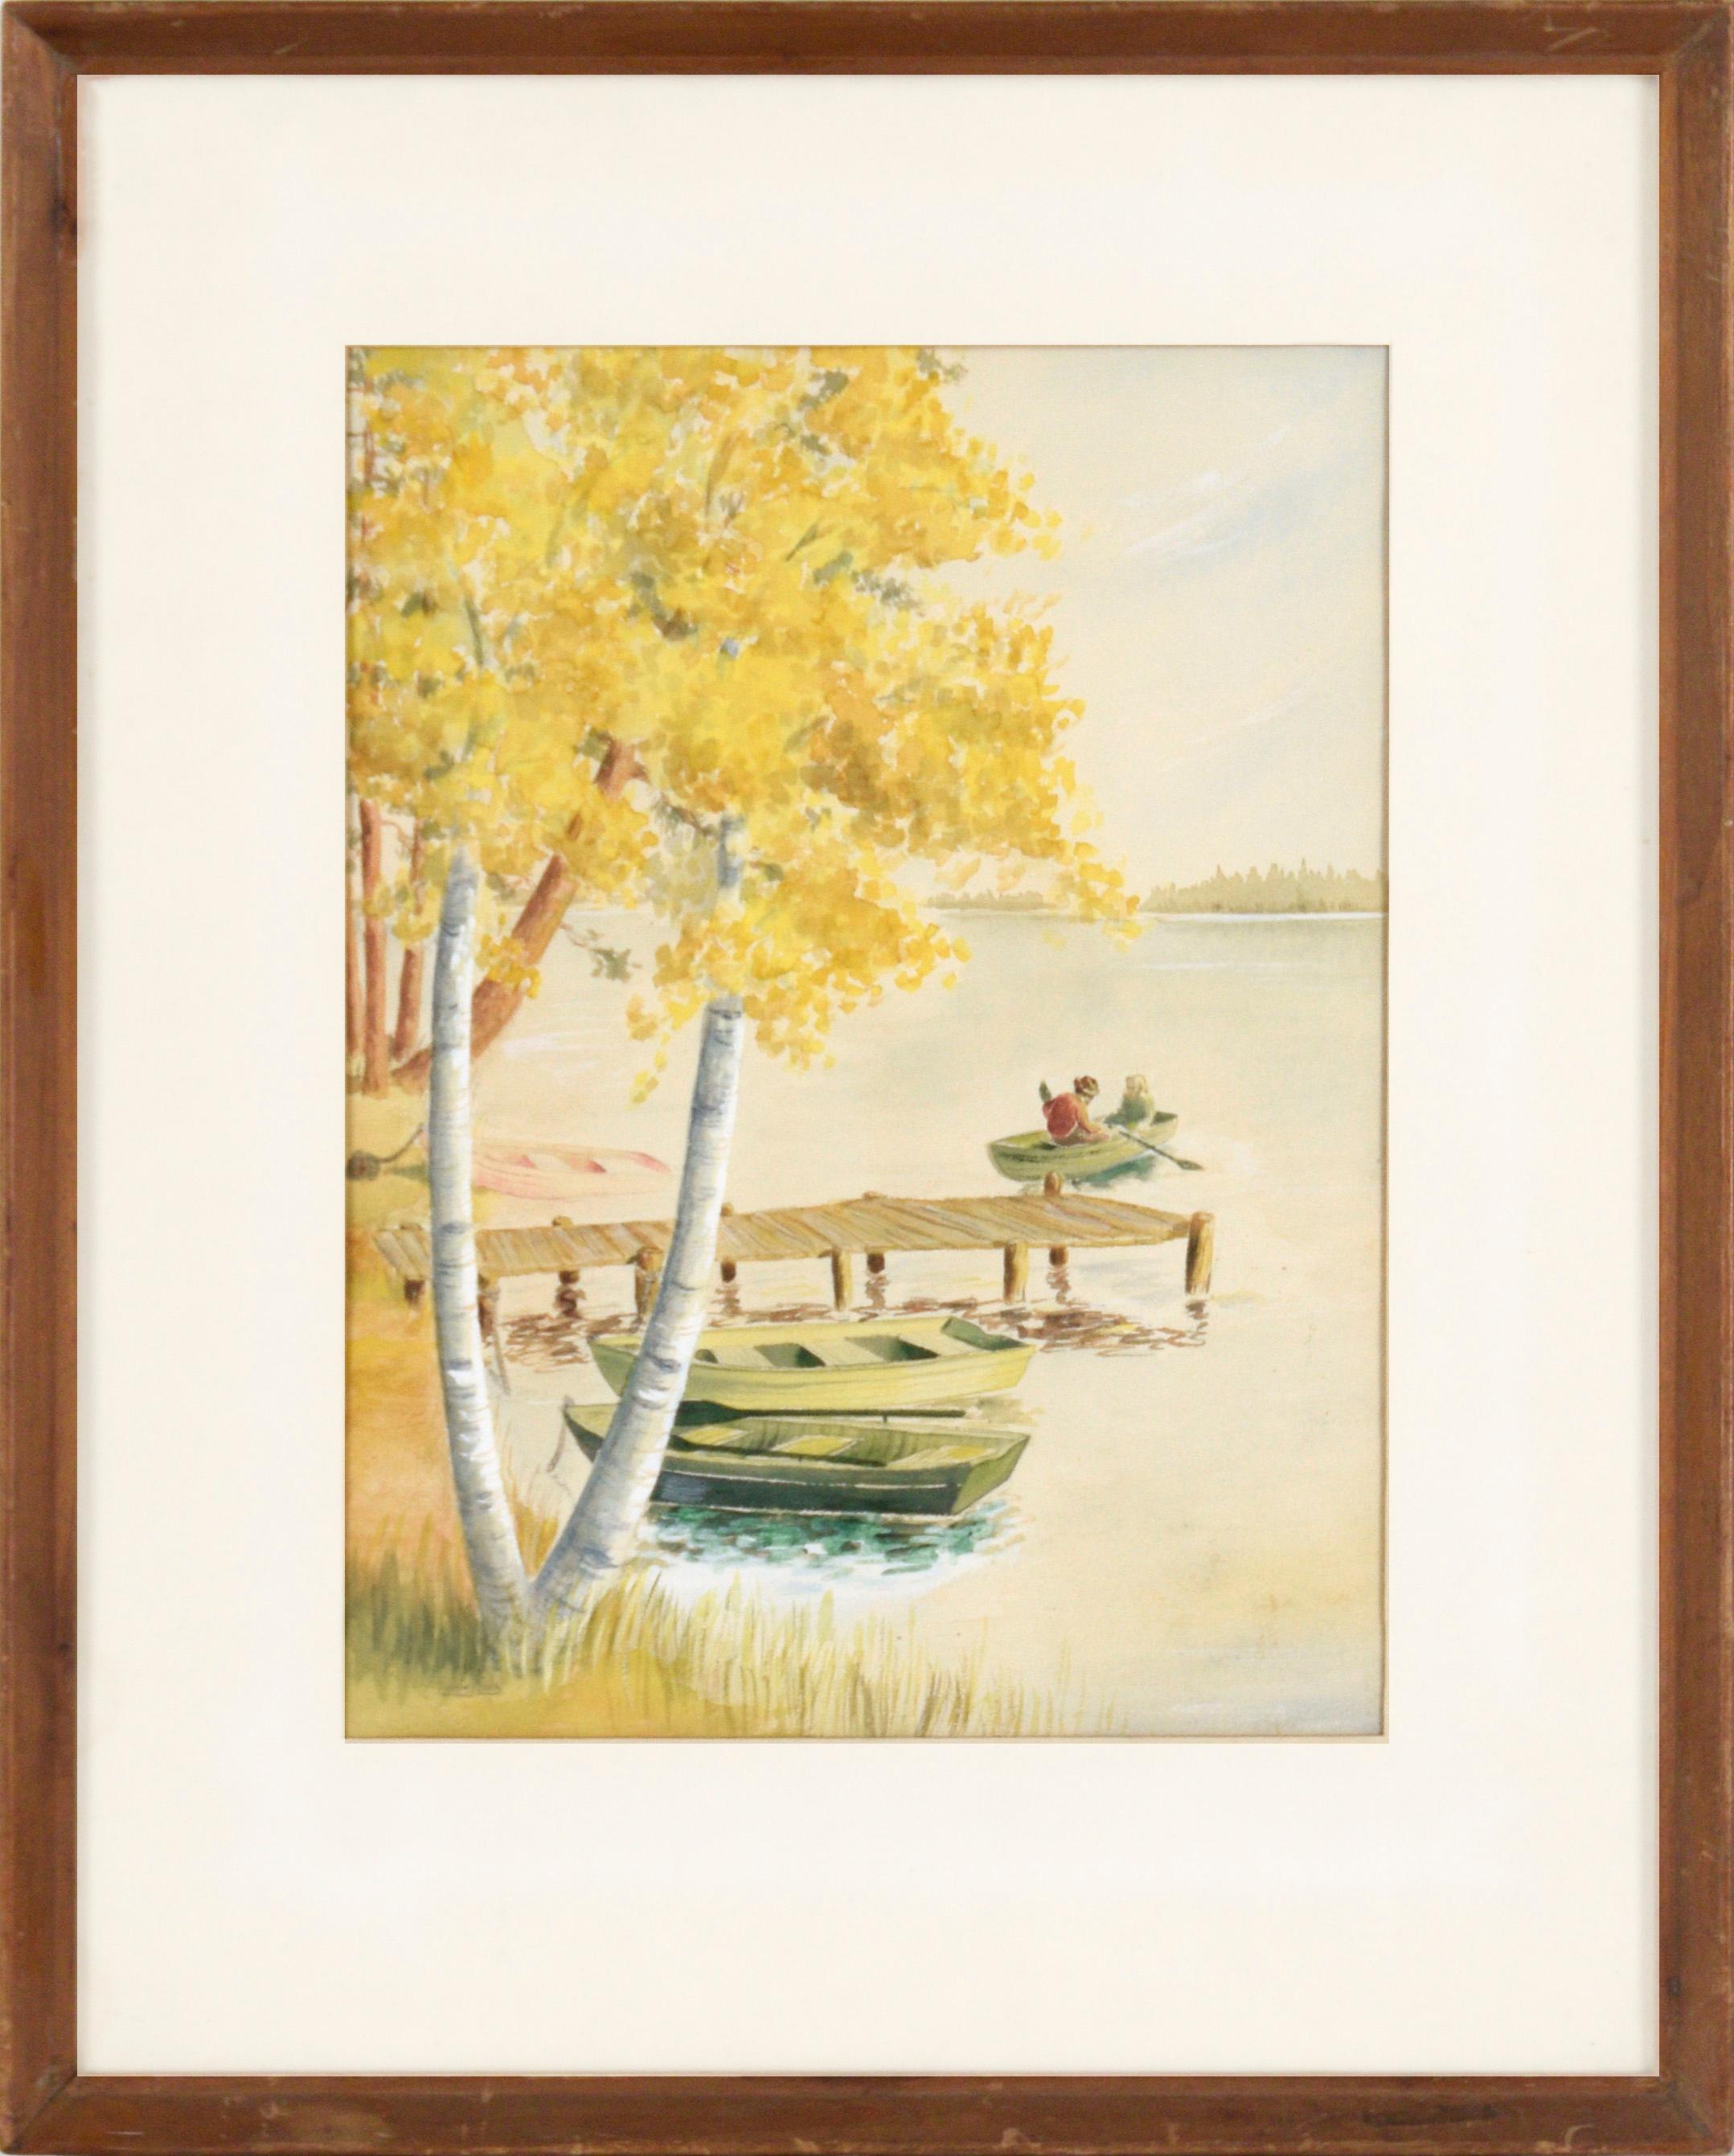 Audrey Balk Landscape Art - Rowboat Outing - Fall Landscape with Rowboats in Watercolor on Paper